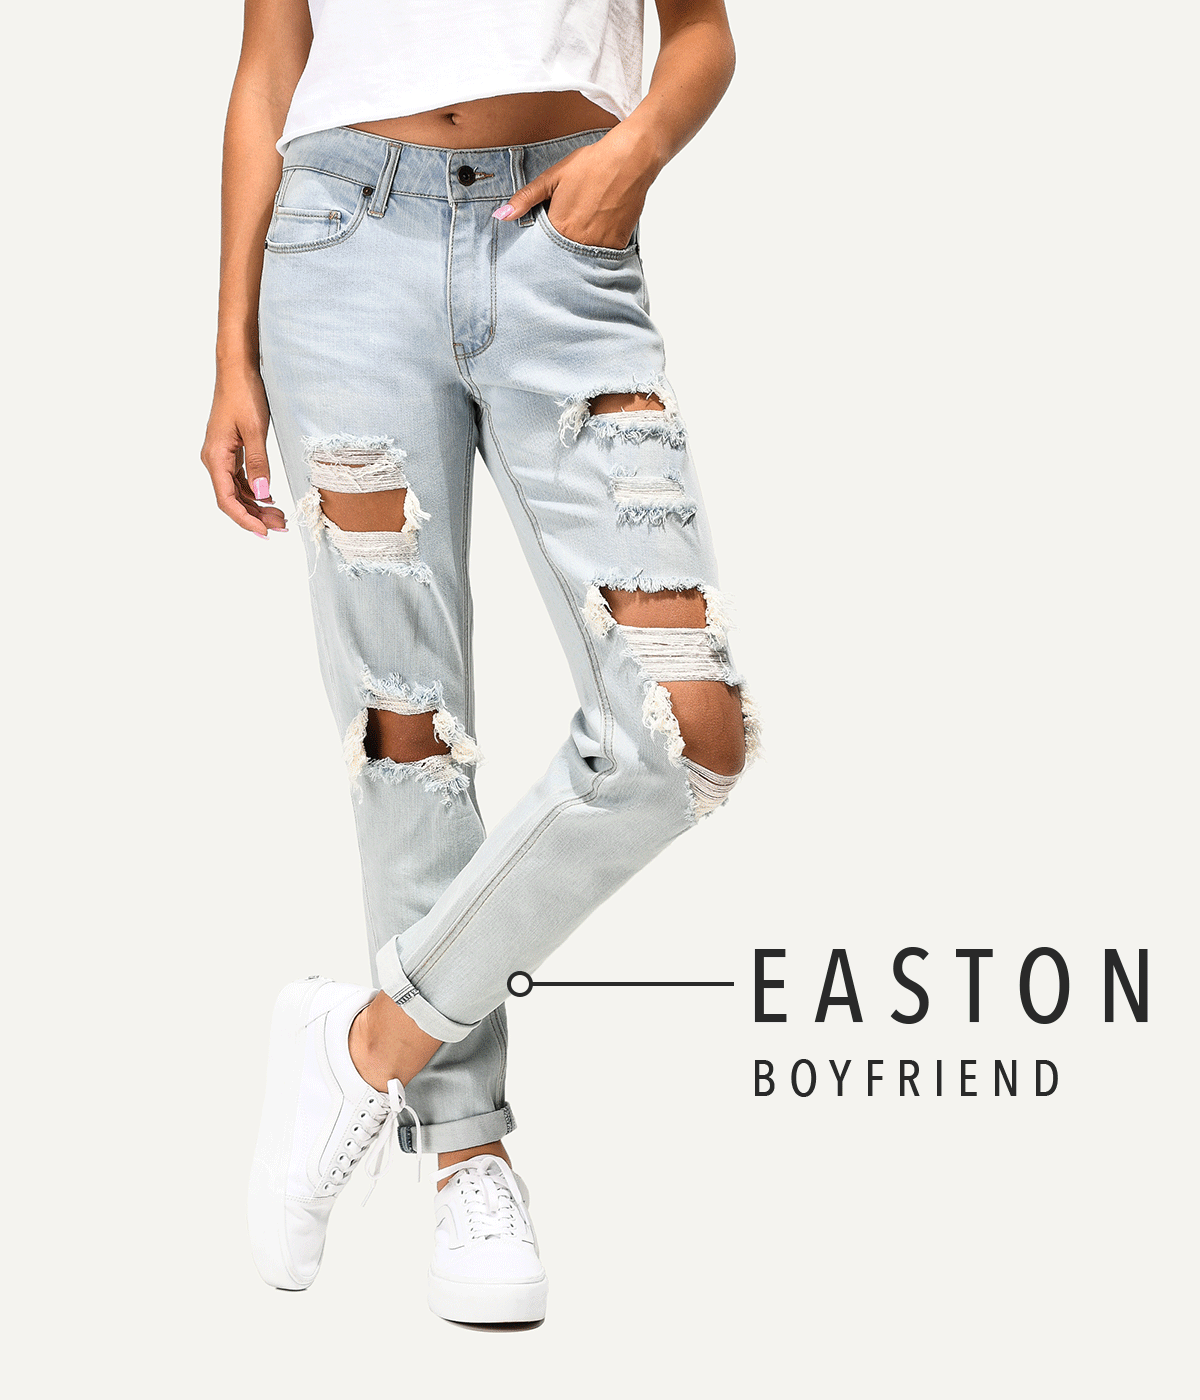 WOMEN'S NEW ARRIVAL JEANS AND DENIM - SHOP JEANS